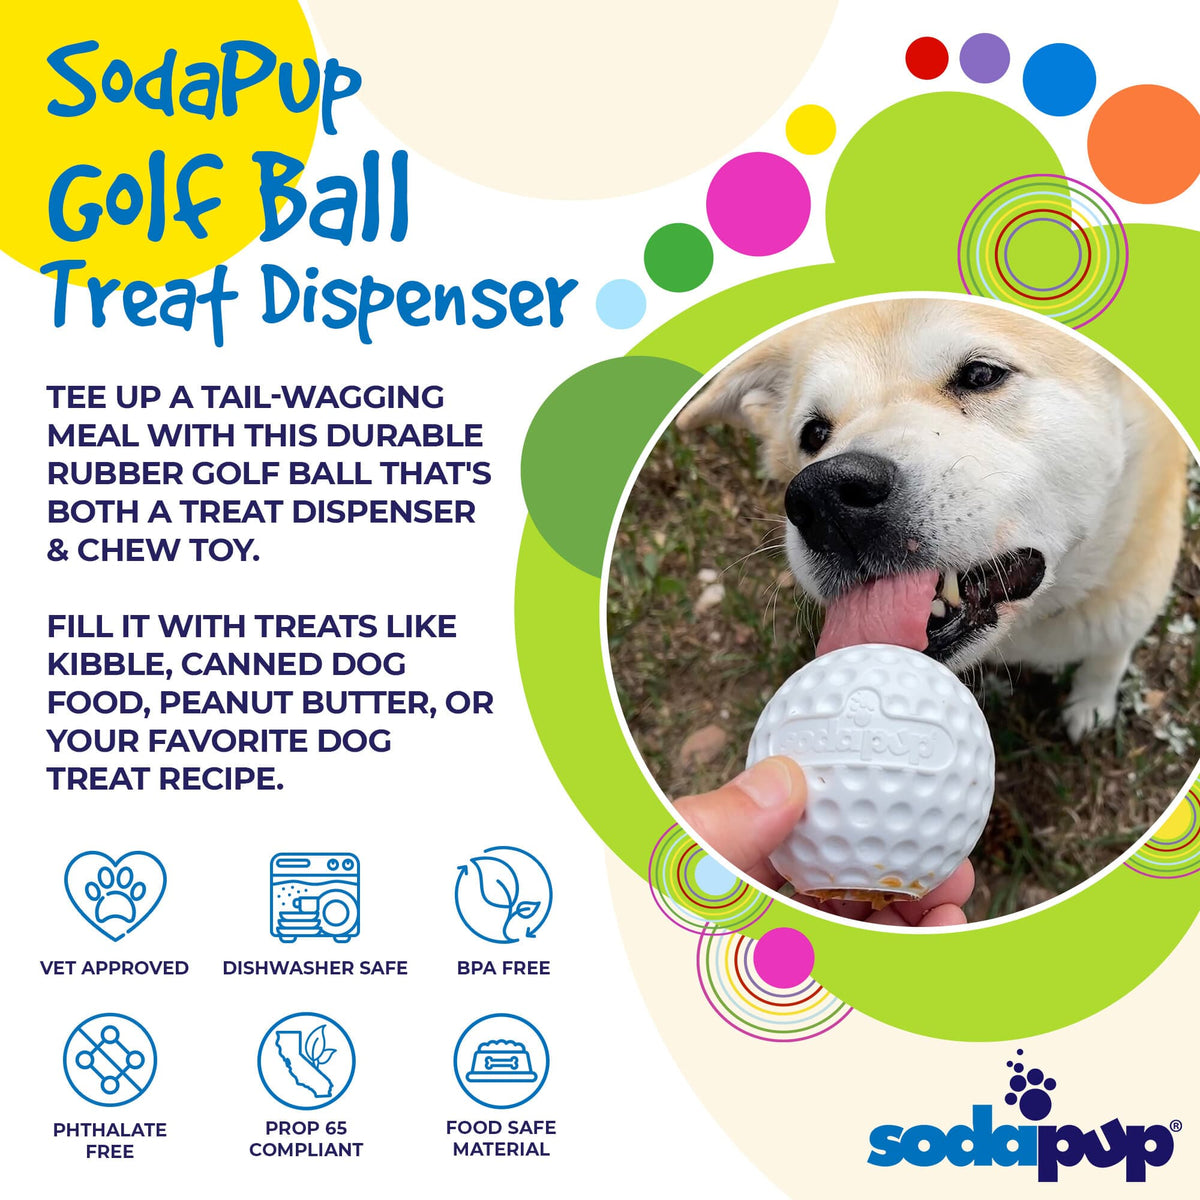 Get Golf Ball Durable Rubber Enrichment Toy at Sodapup!